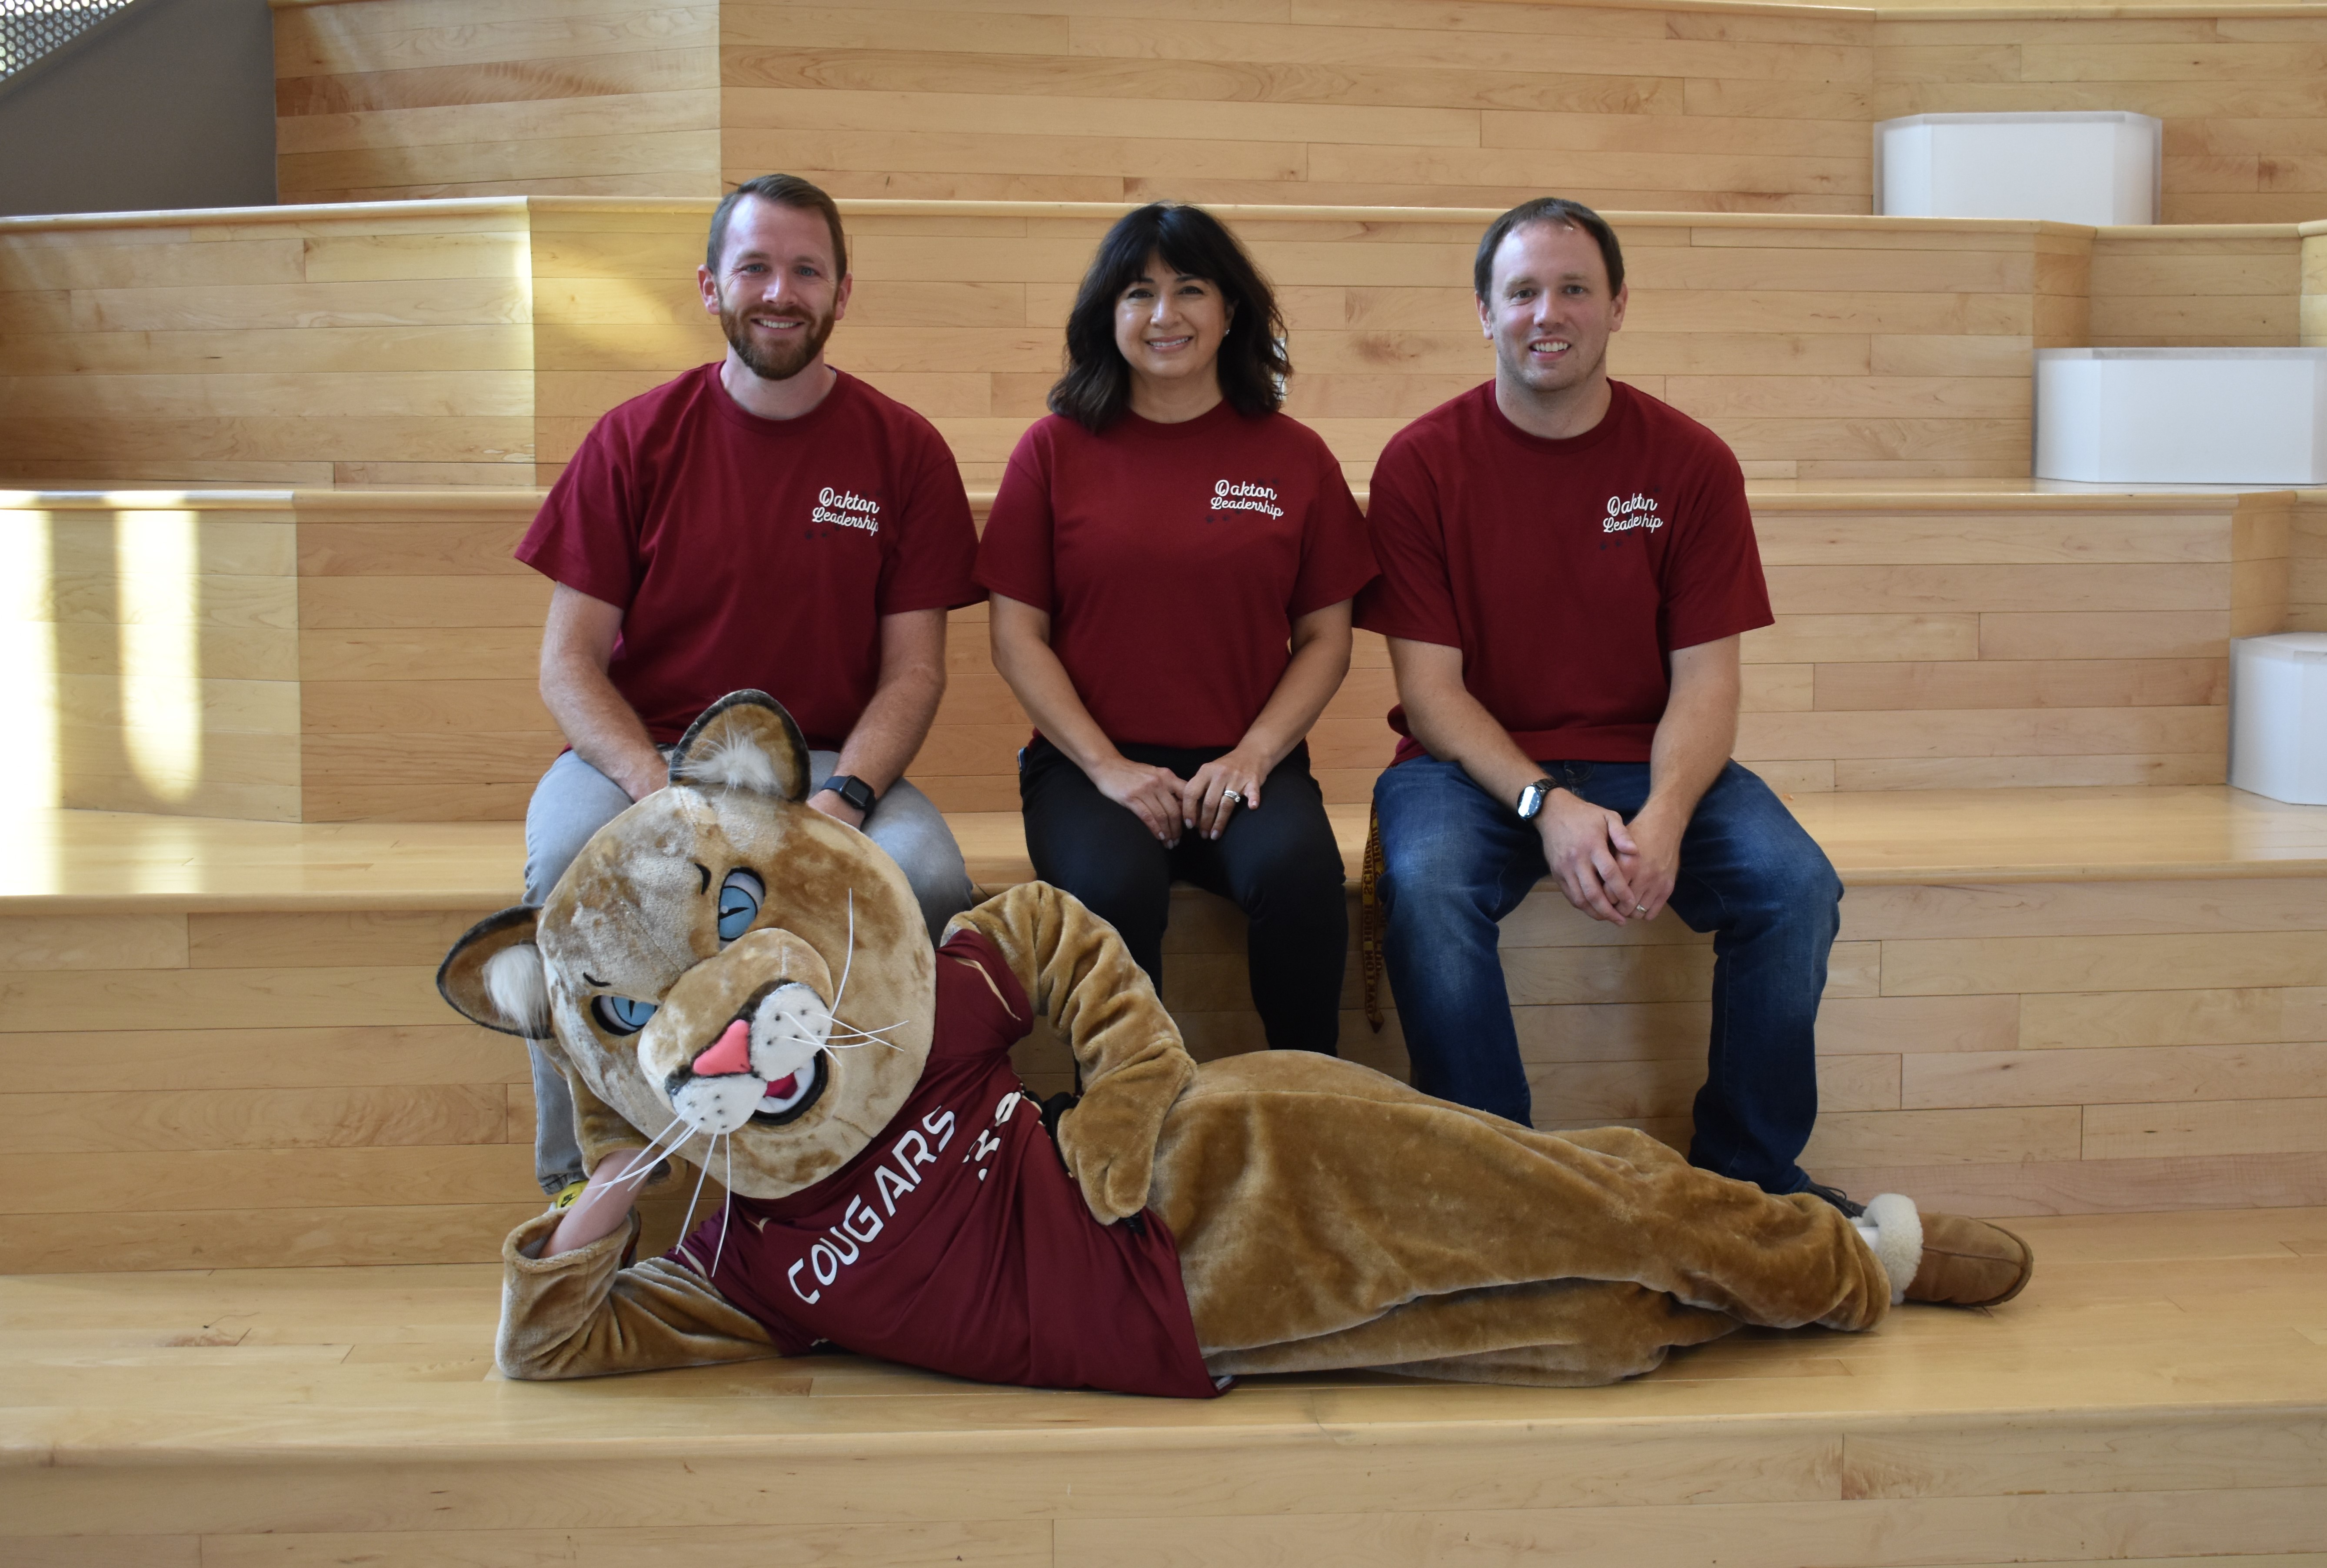 image of Mr. Farrell, Ms. weber, and Mr. McCulla on stairs with the Oakton Cougar mascot lying on the stairs in front of them